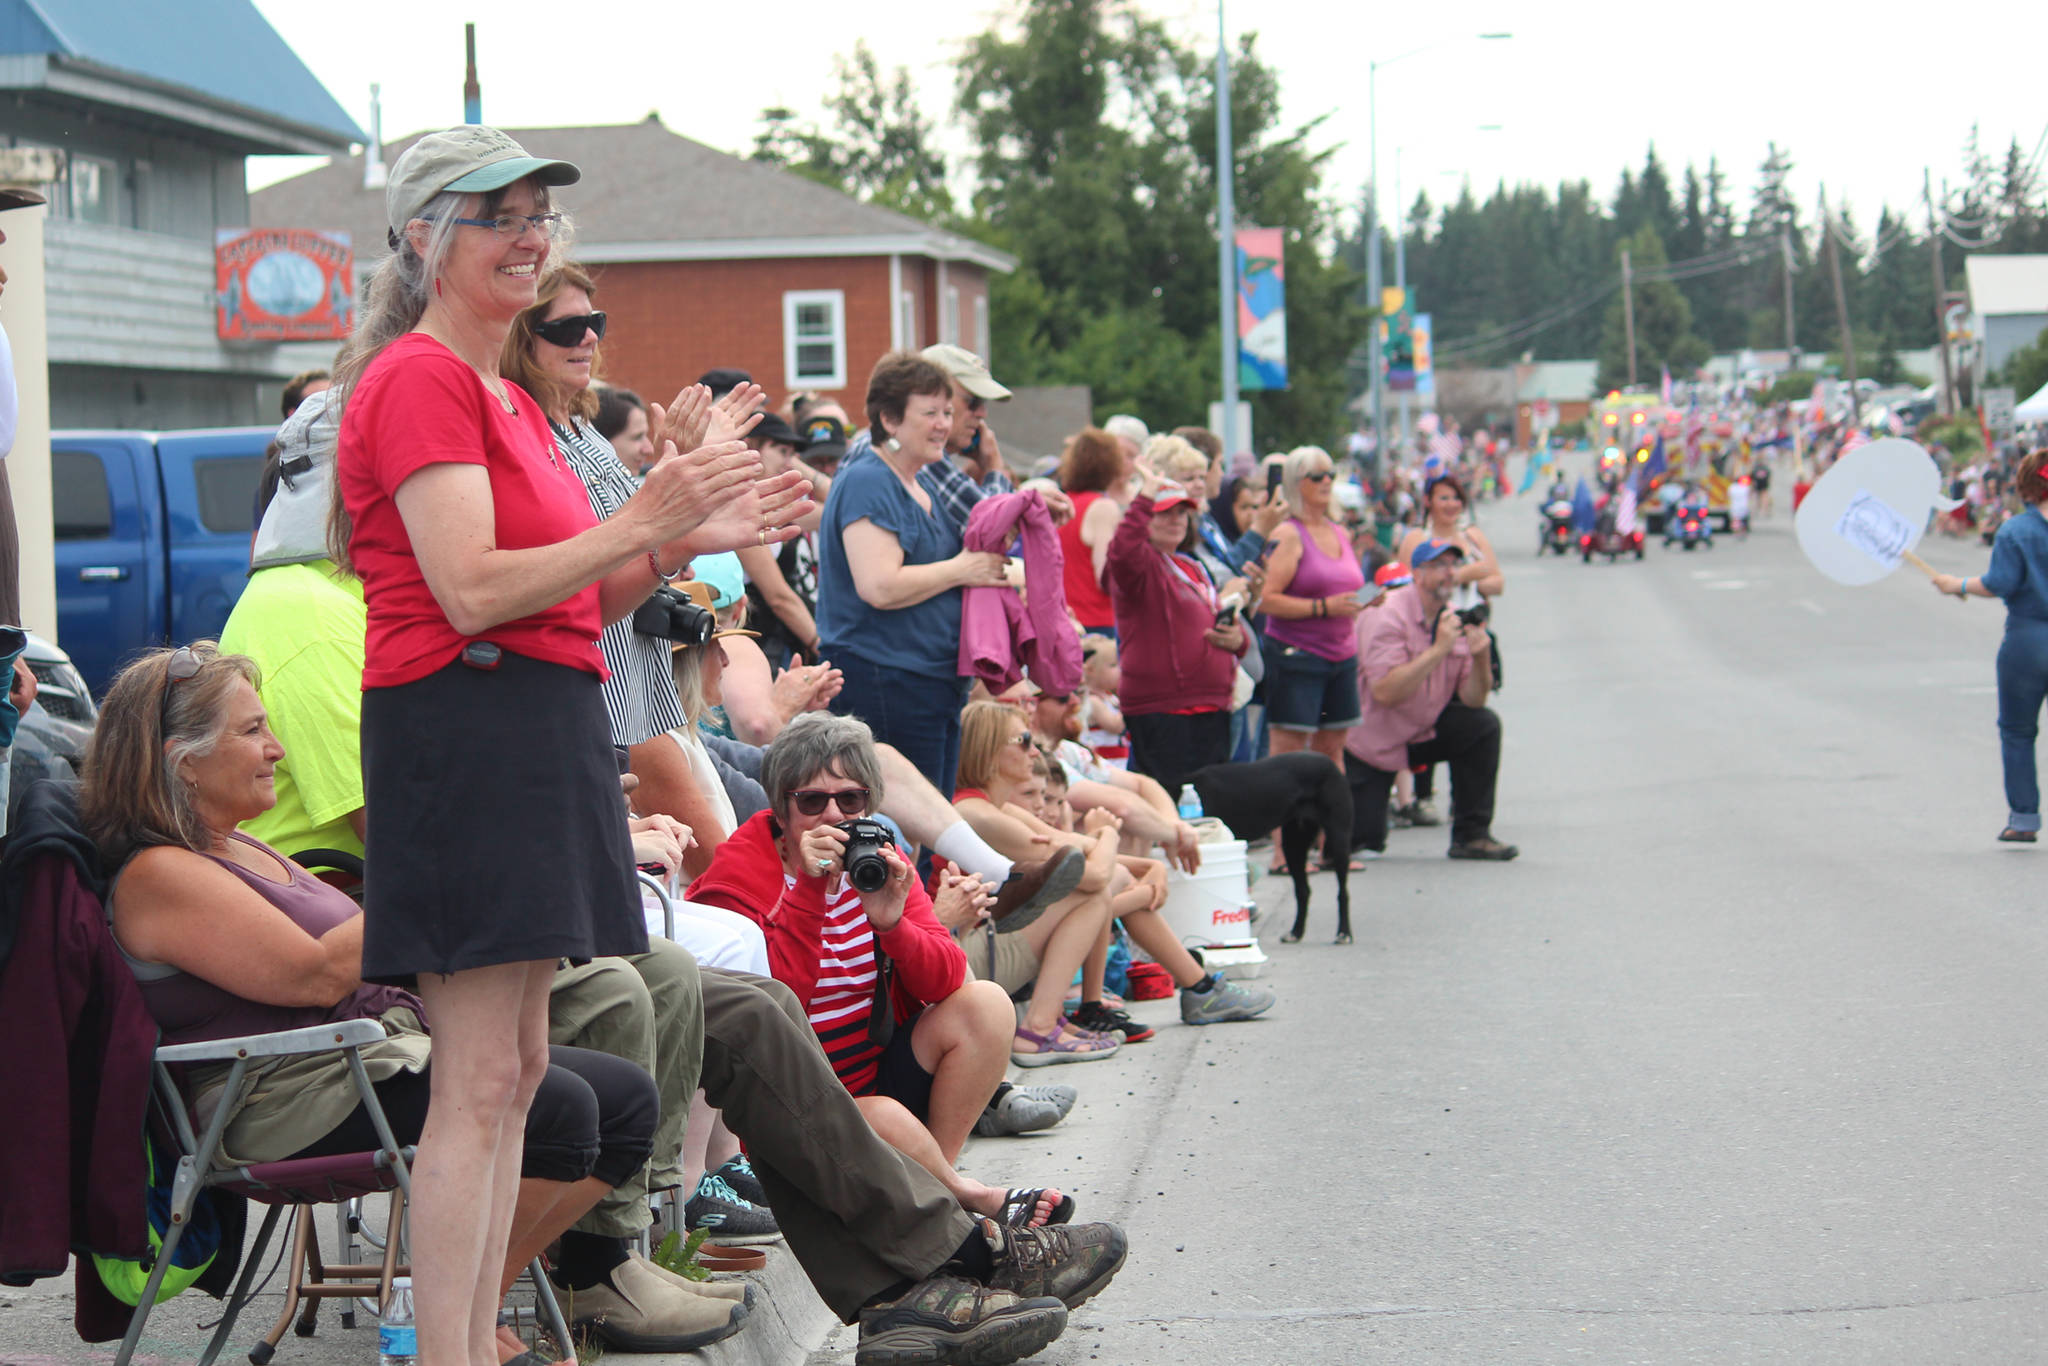 Onlookers cheer on participants in this year’s July Fourth parade hosted by the Homer Chamber of Commerce on Thursday, July 4, 2019 on Pioneer Avenue in Homer, Alaska. (Photo by Megan Pacer/Homer News)